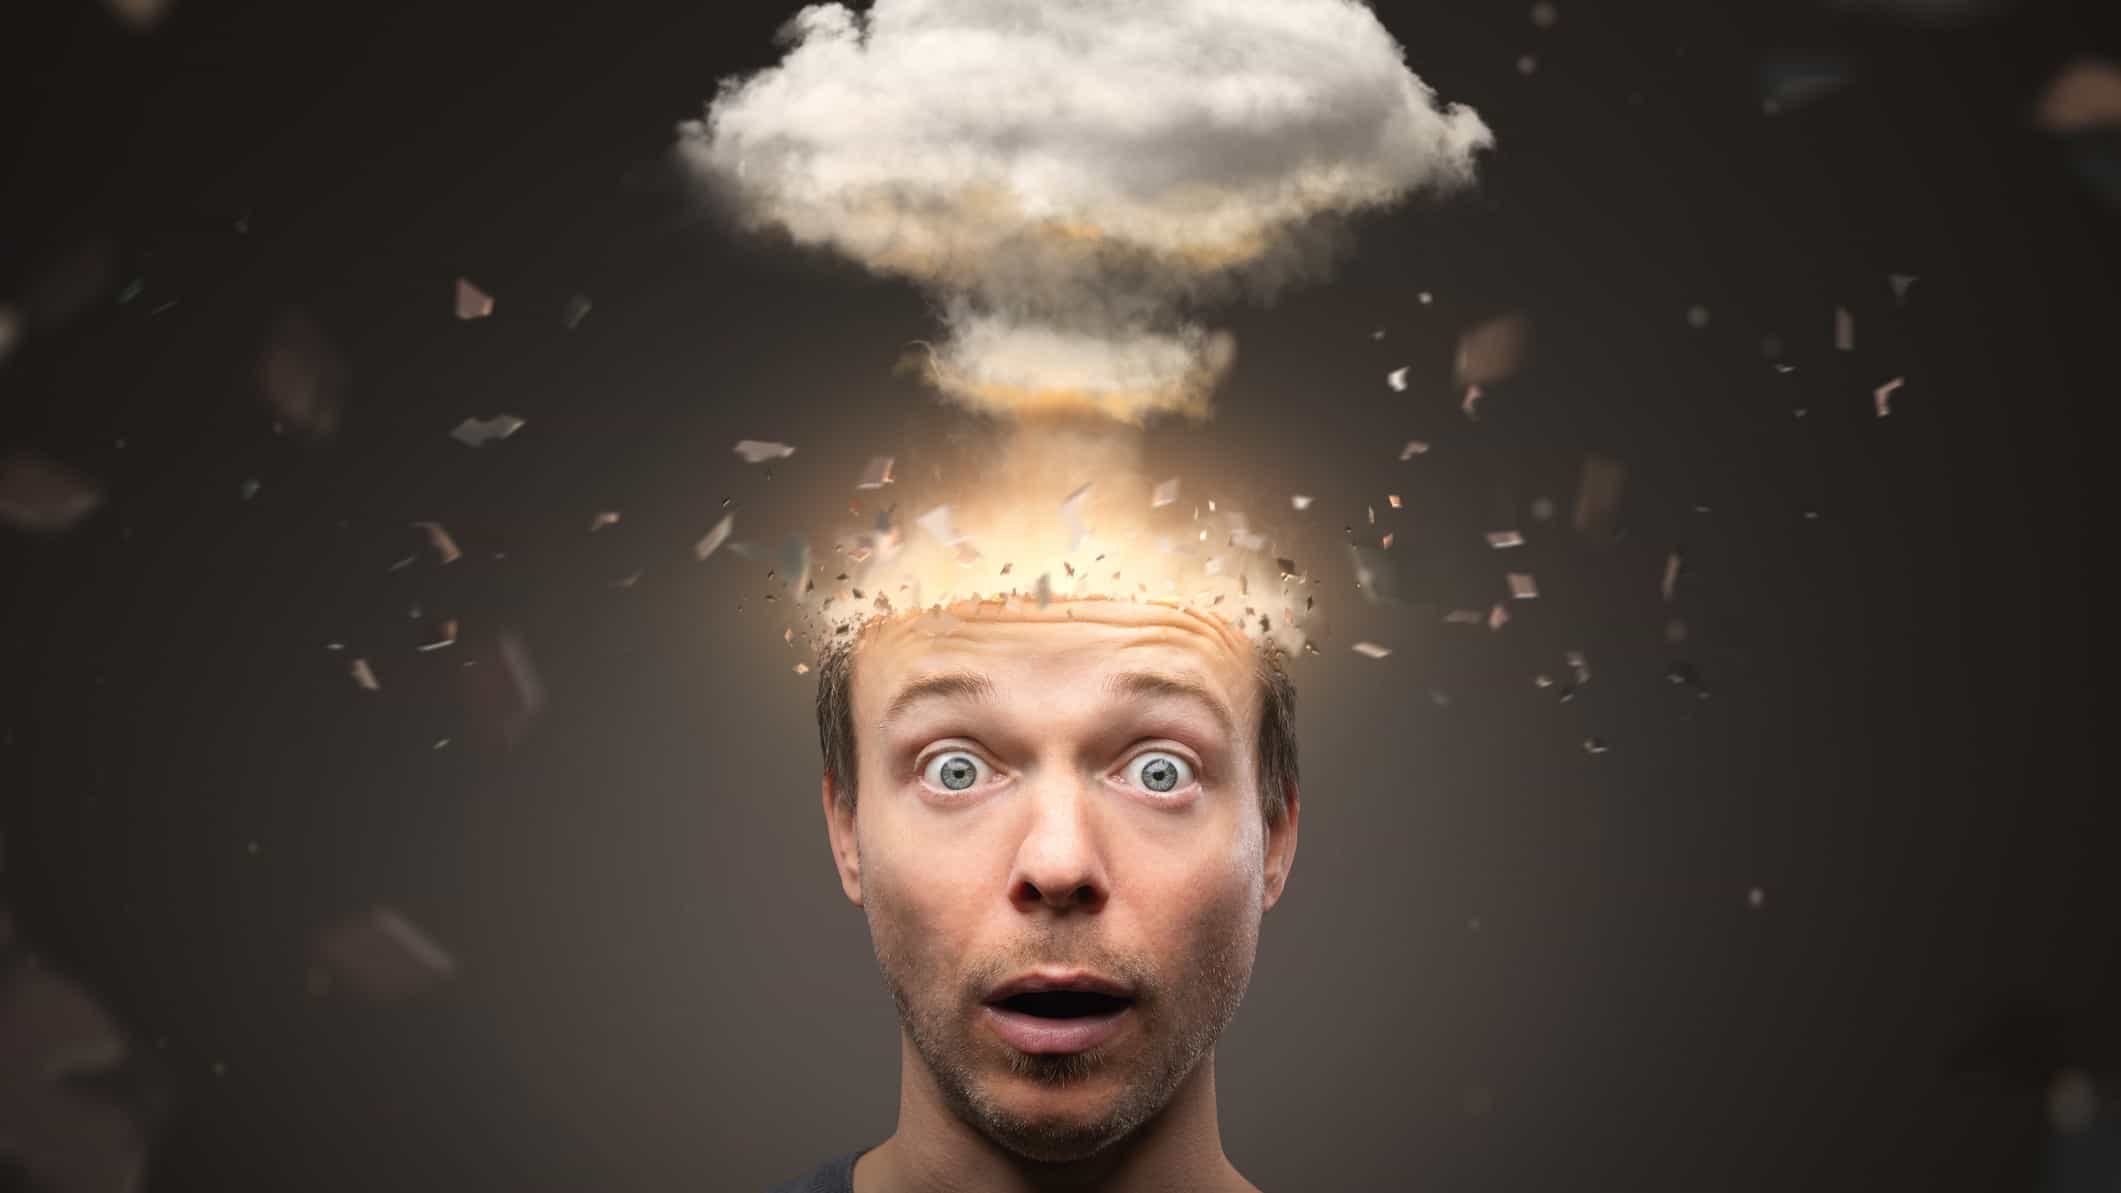 exploding asx share price represented by cloud coming out of man's brain